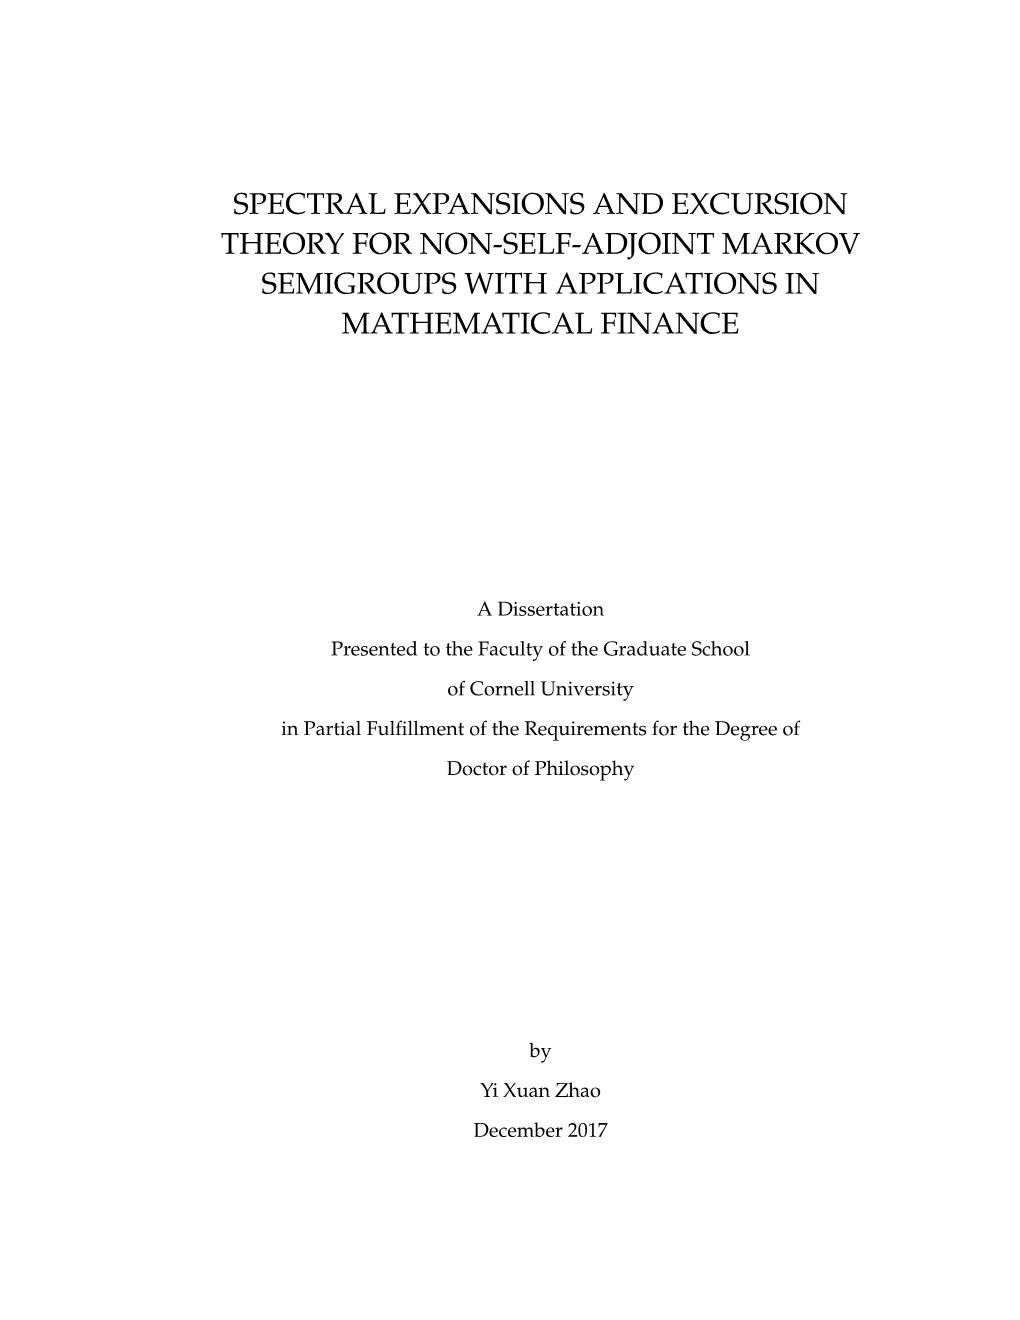 Spectral Expansions and Excursion Theory for Non-Self-Adjoint Markov Semigroups with Applications in Mathematical Finance